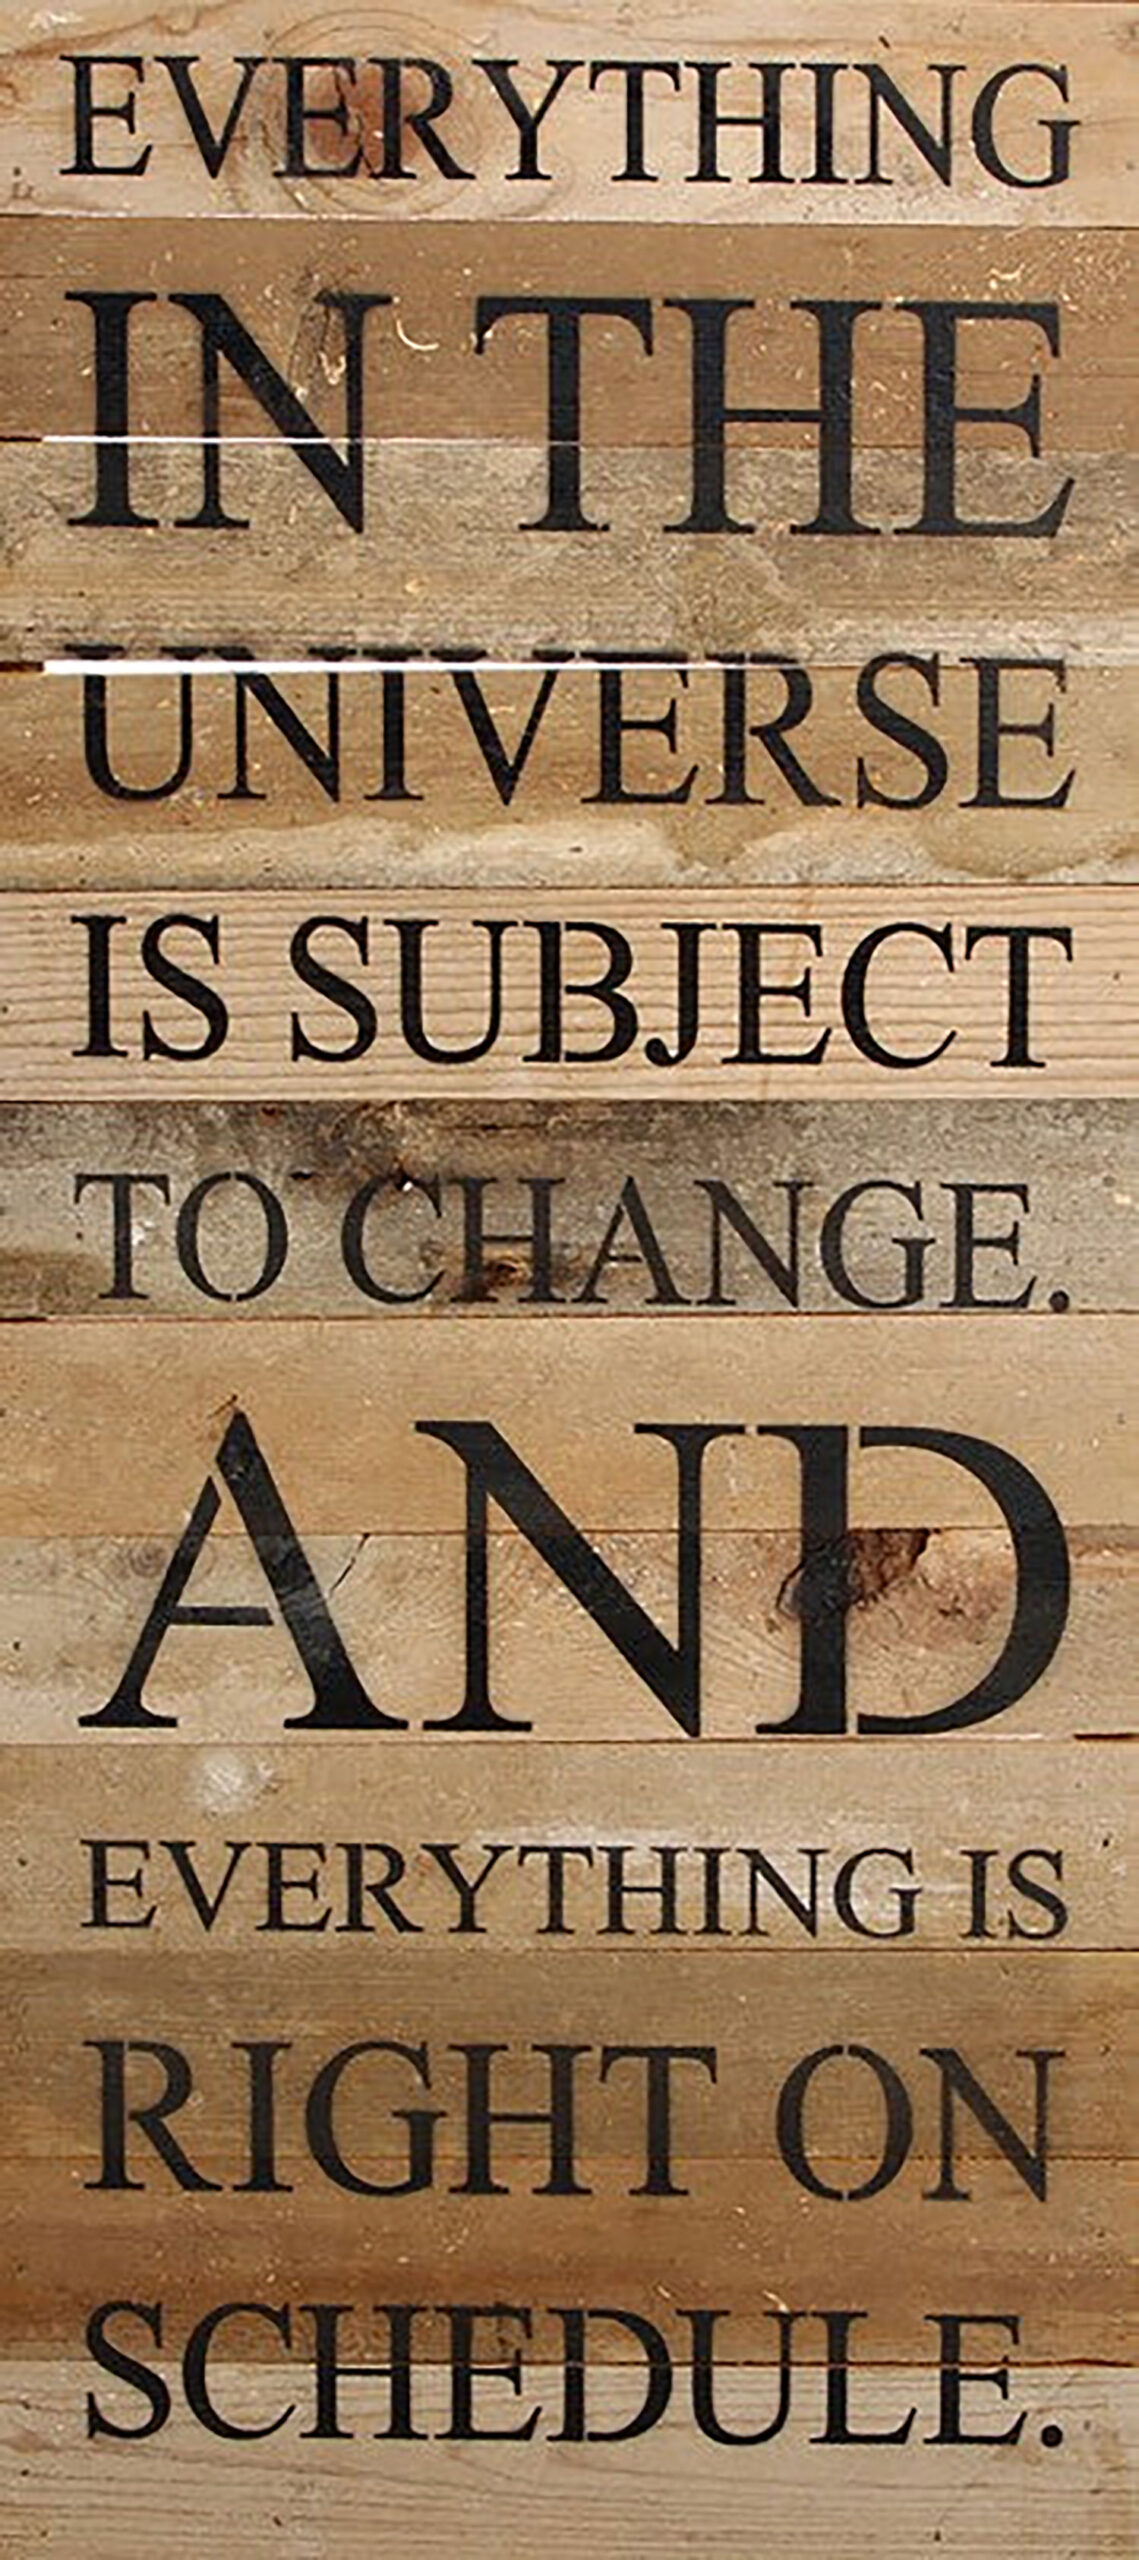 Everything in the universe is subject to change. And everything is right on schedule. / 12"x24" Reclaimed Wood Sign